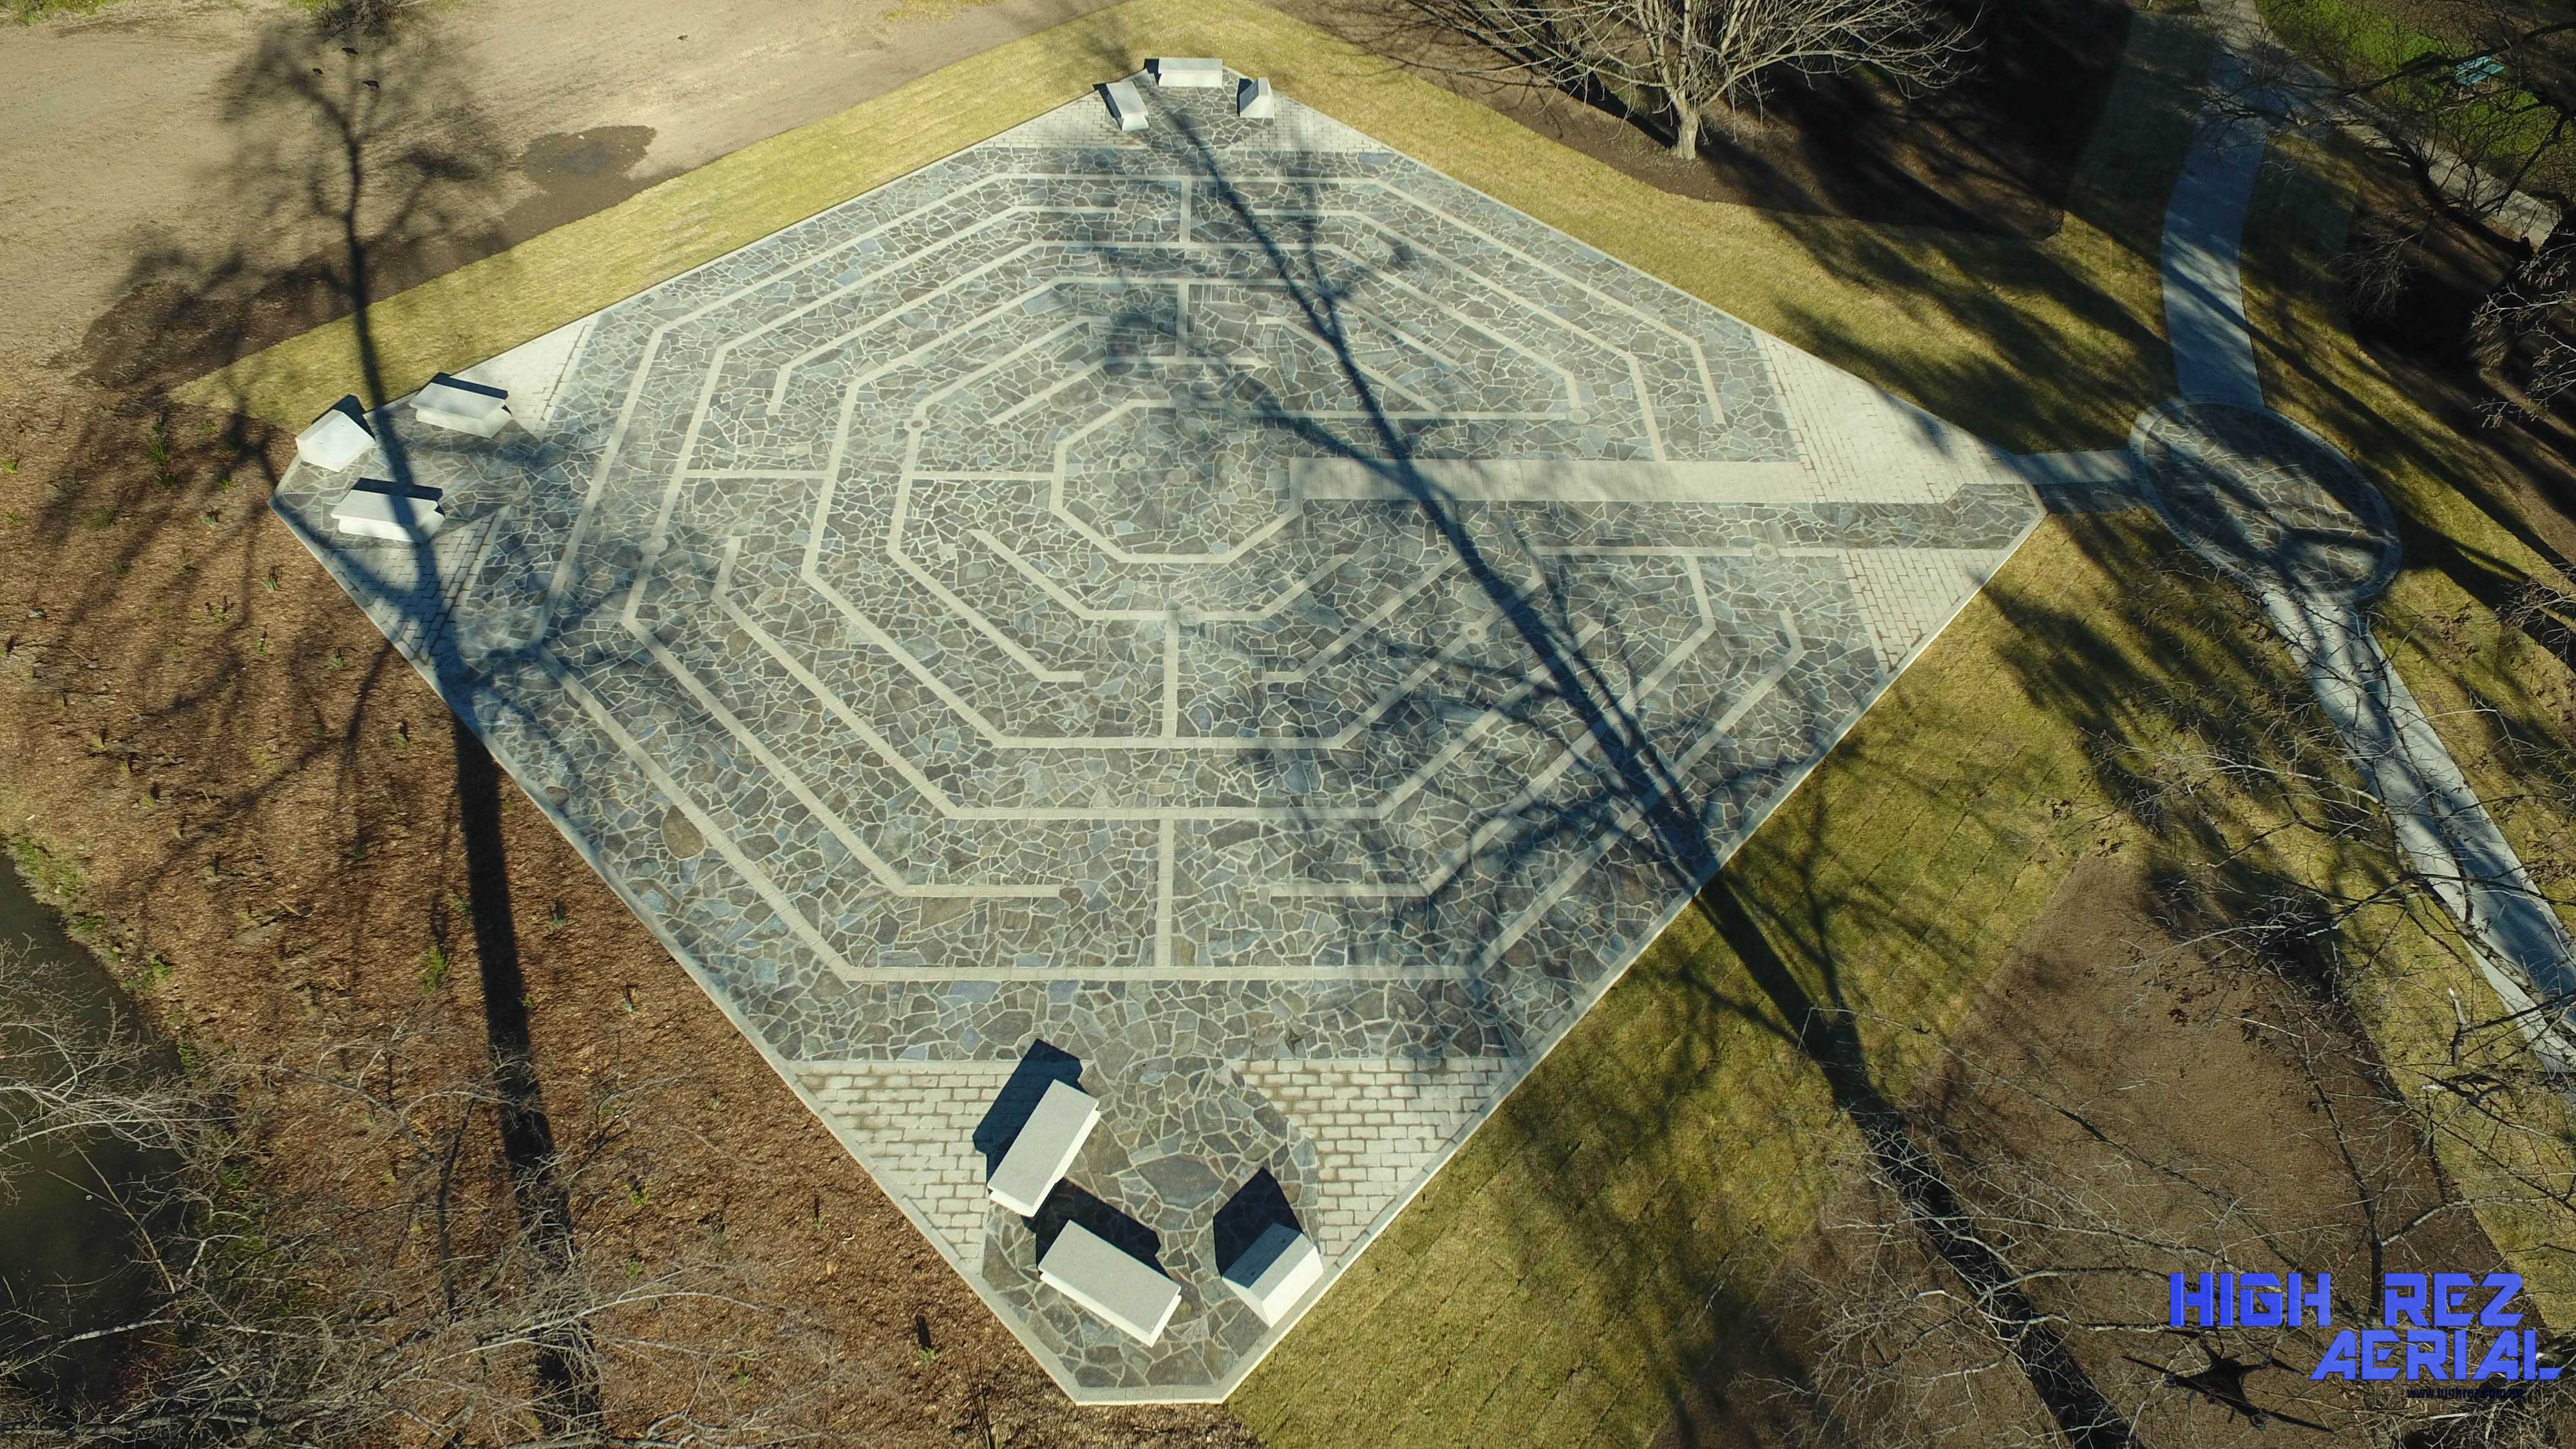 Landscape work and paving completed by Dan and Dan Landscaping for the Tumut Memorial Labyrinth